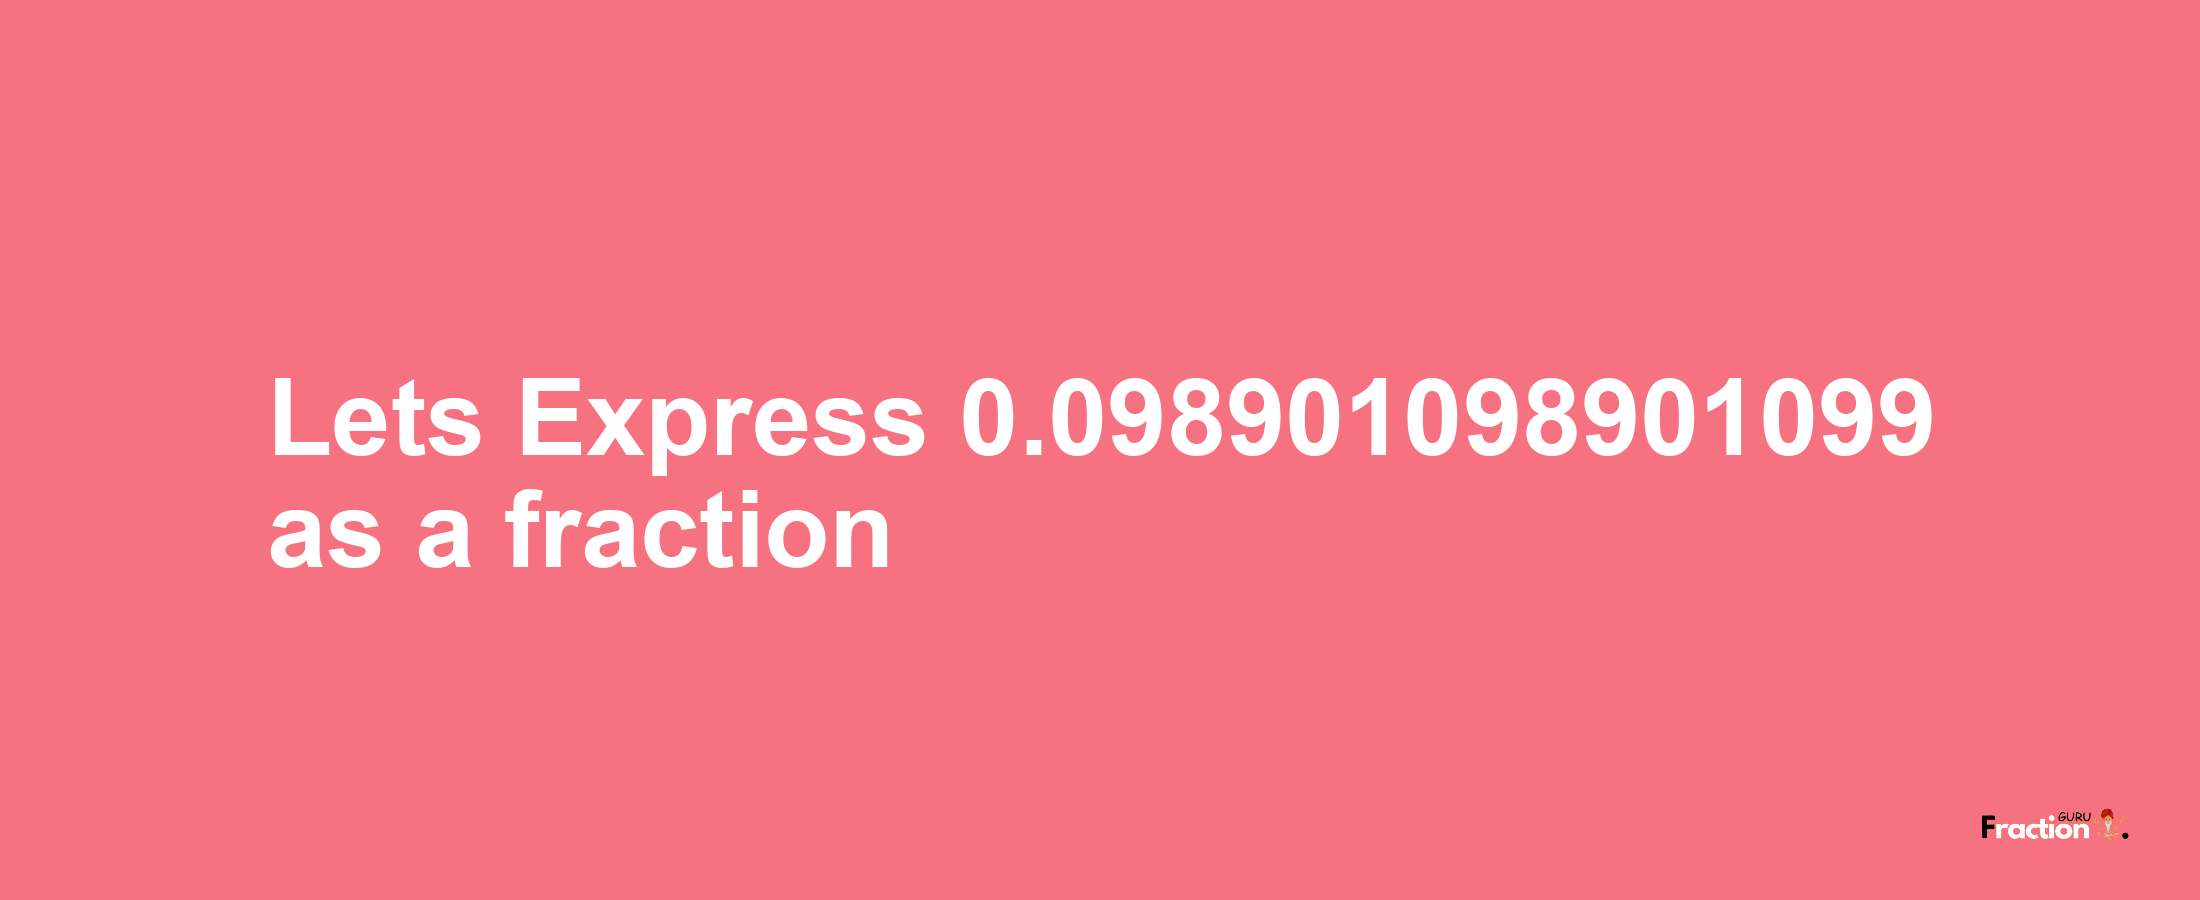 Lets Express 0.098901098901099 as afraction